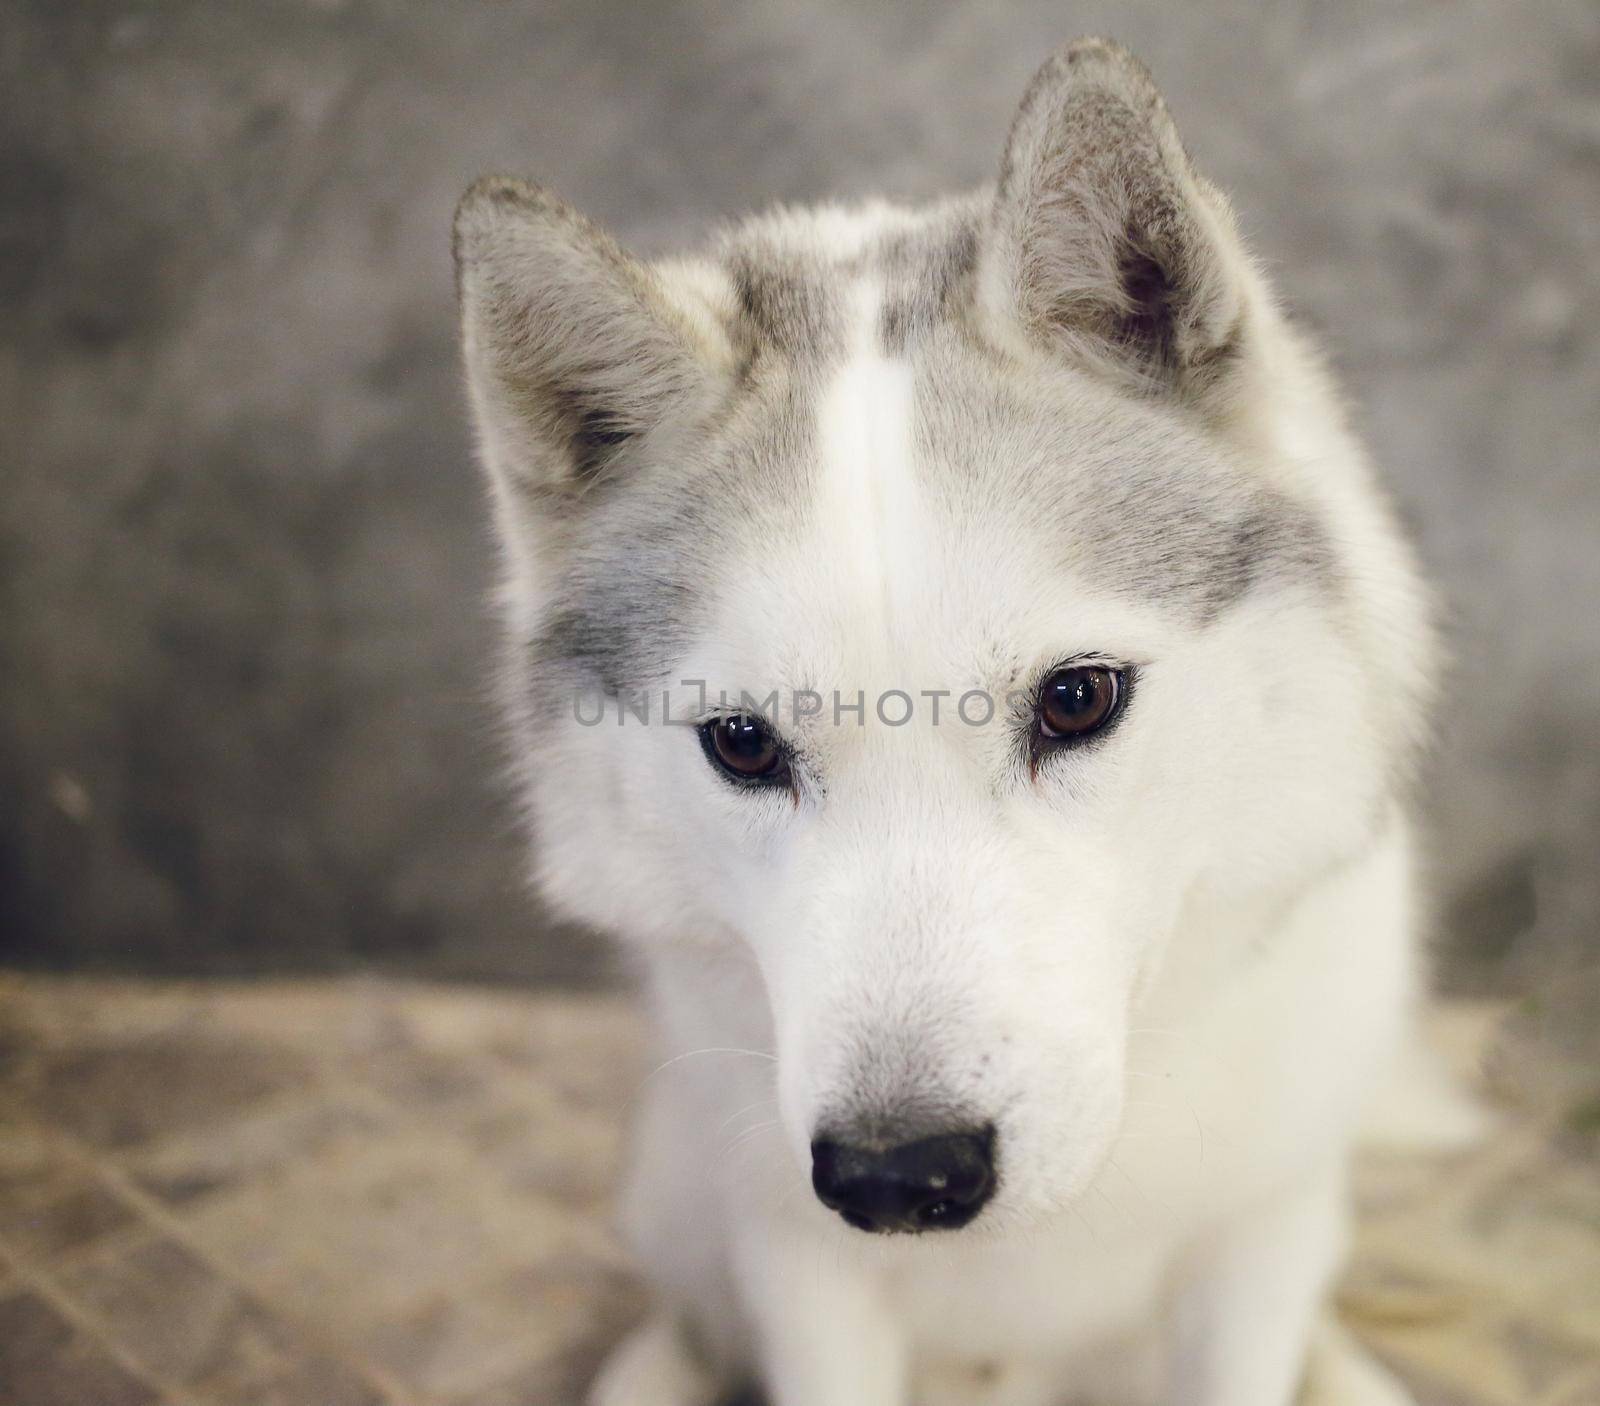 The muzzle of a dog Siberian Husky gray and white. 